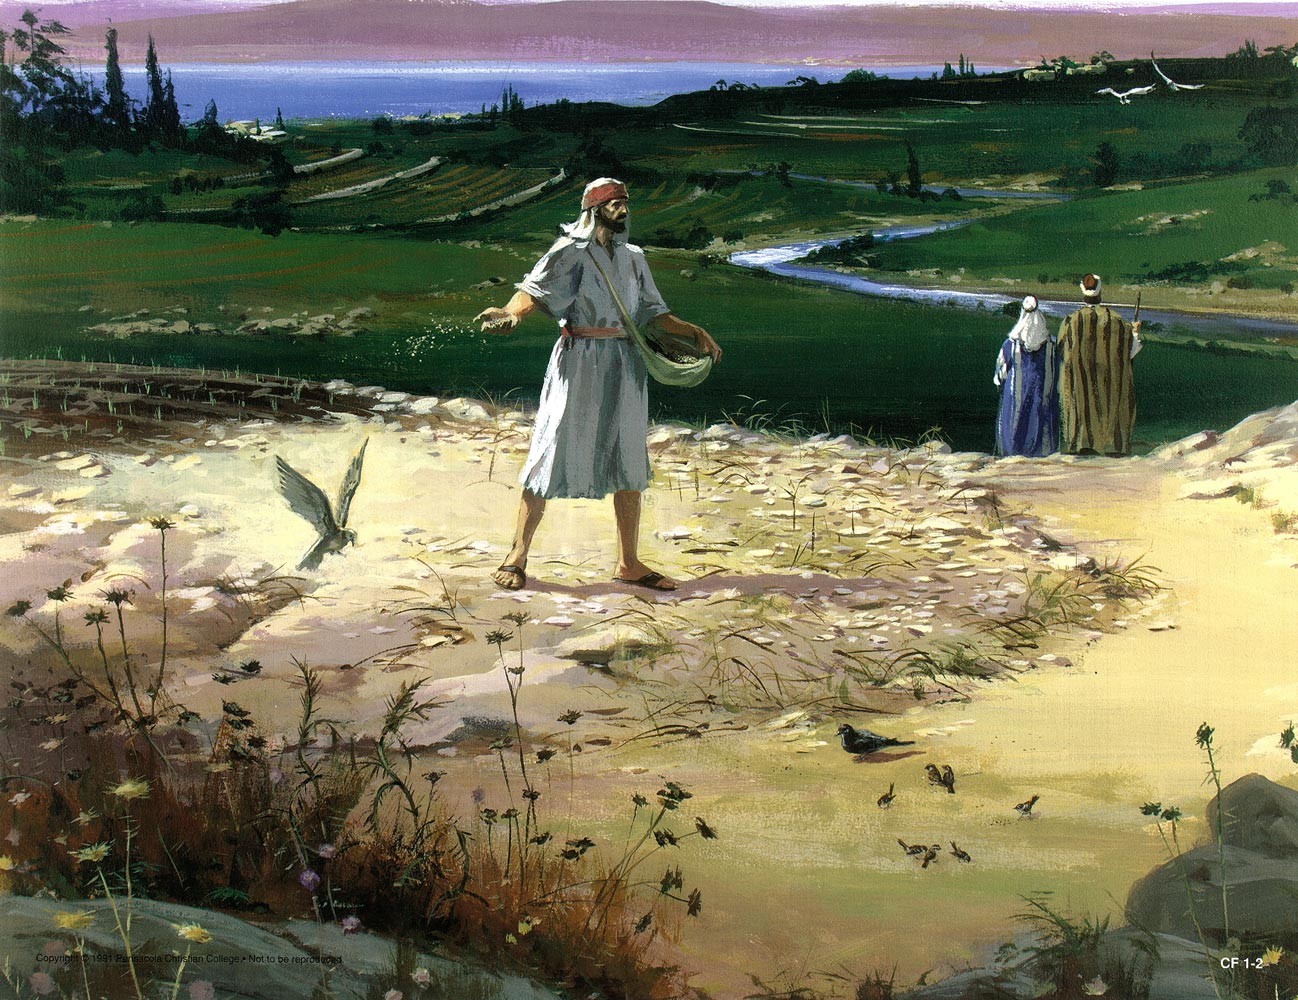 The Importance Of Parables In The Bible